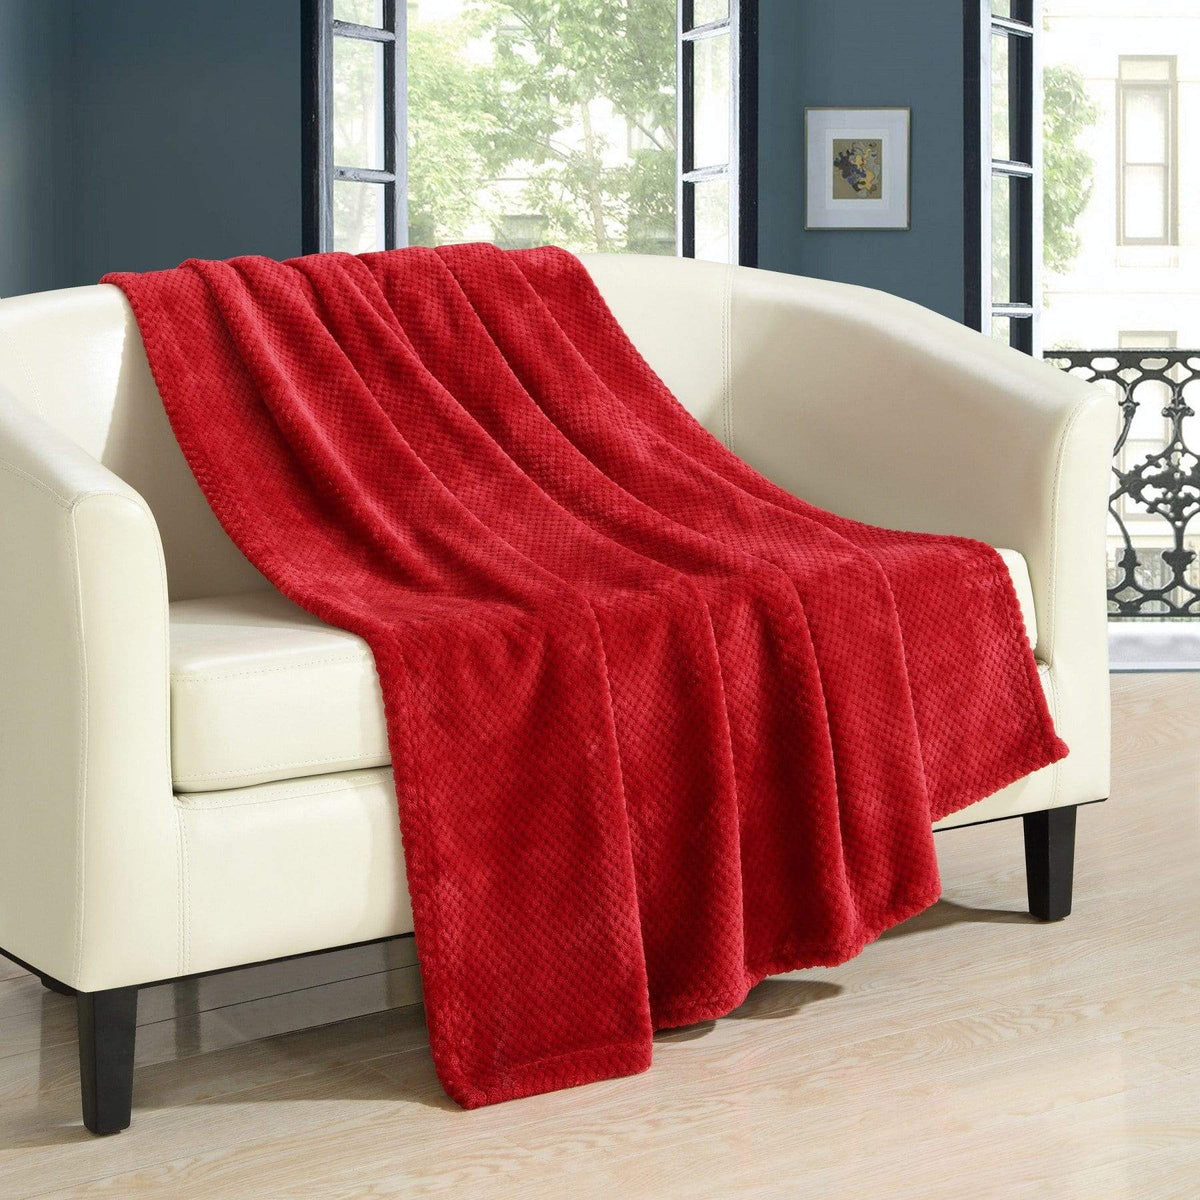 Chic Home Dijon Faux Fur Waffle Textured Throw Blanket Red